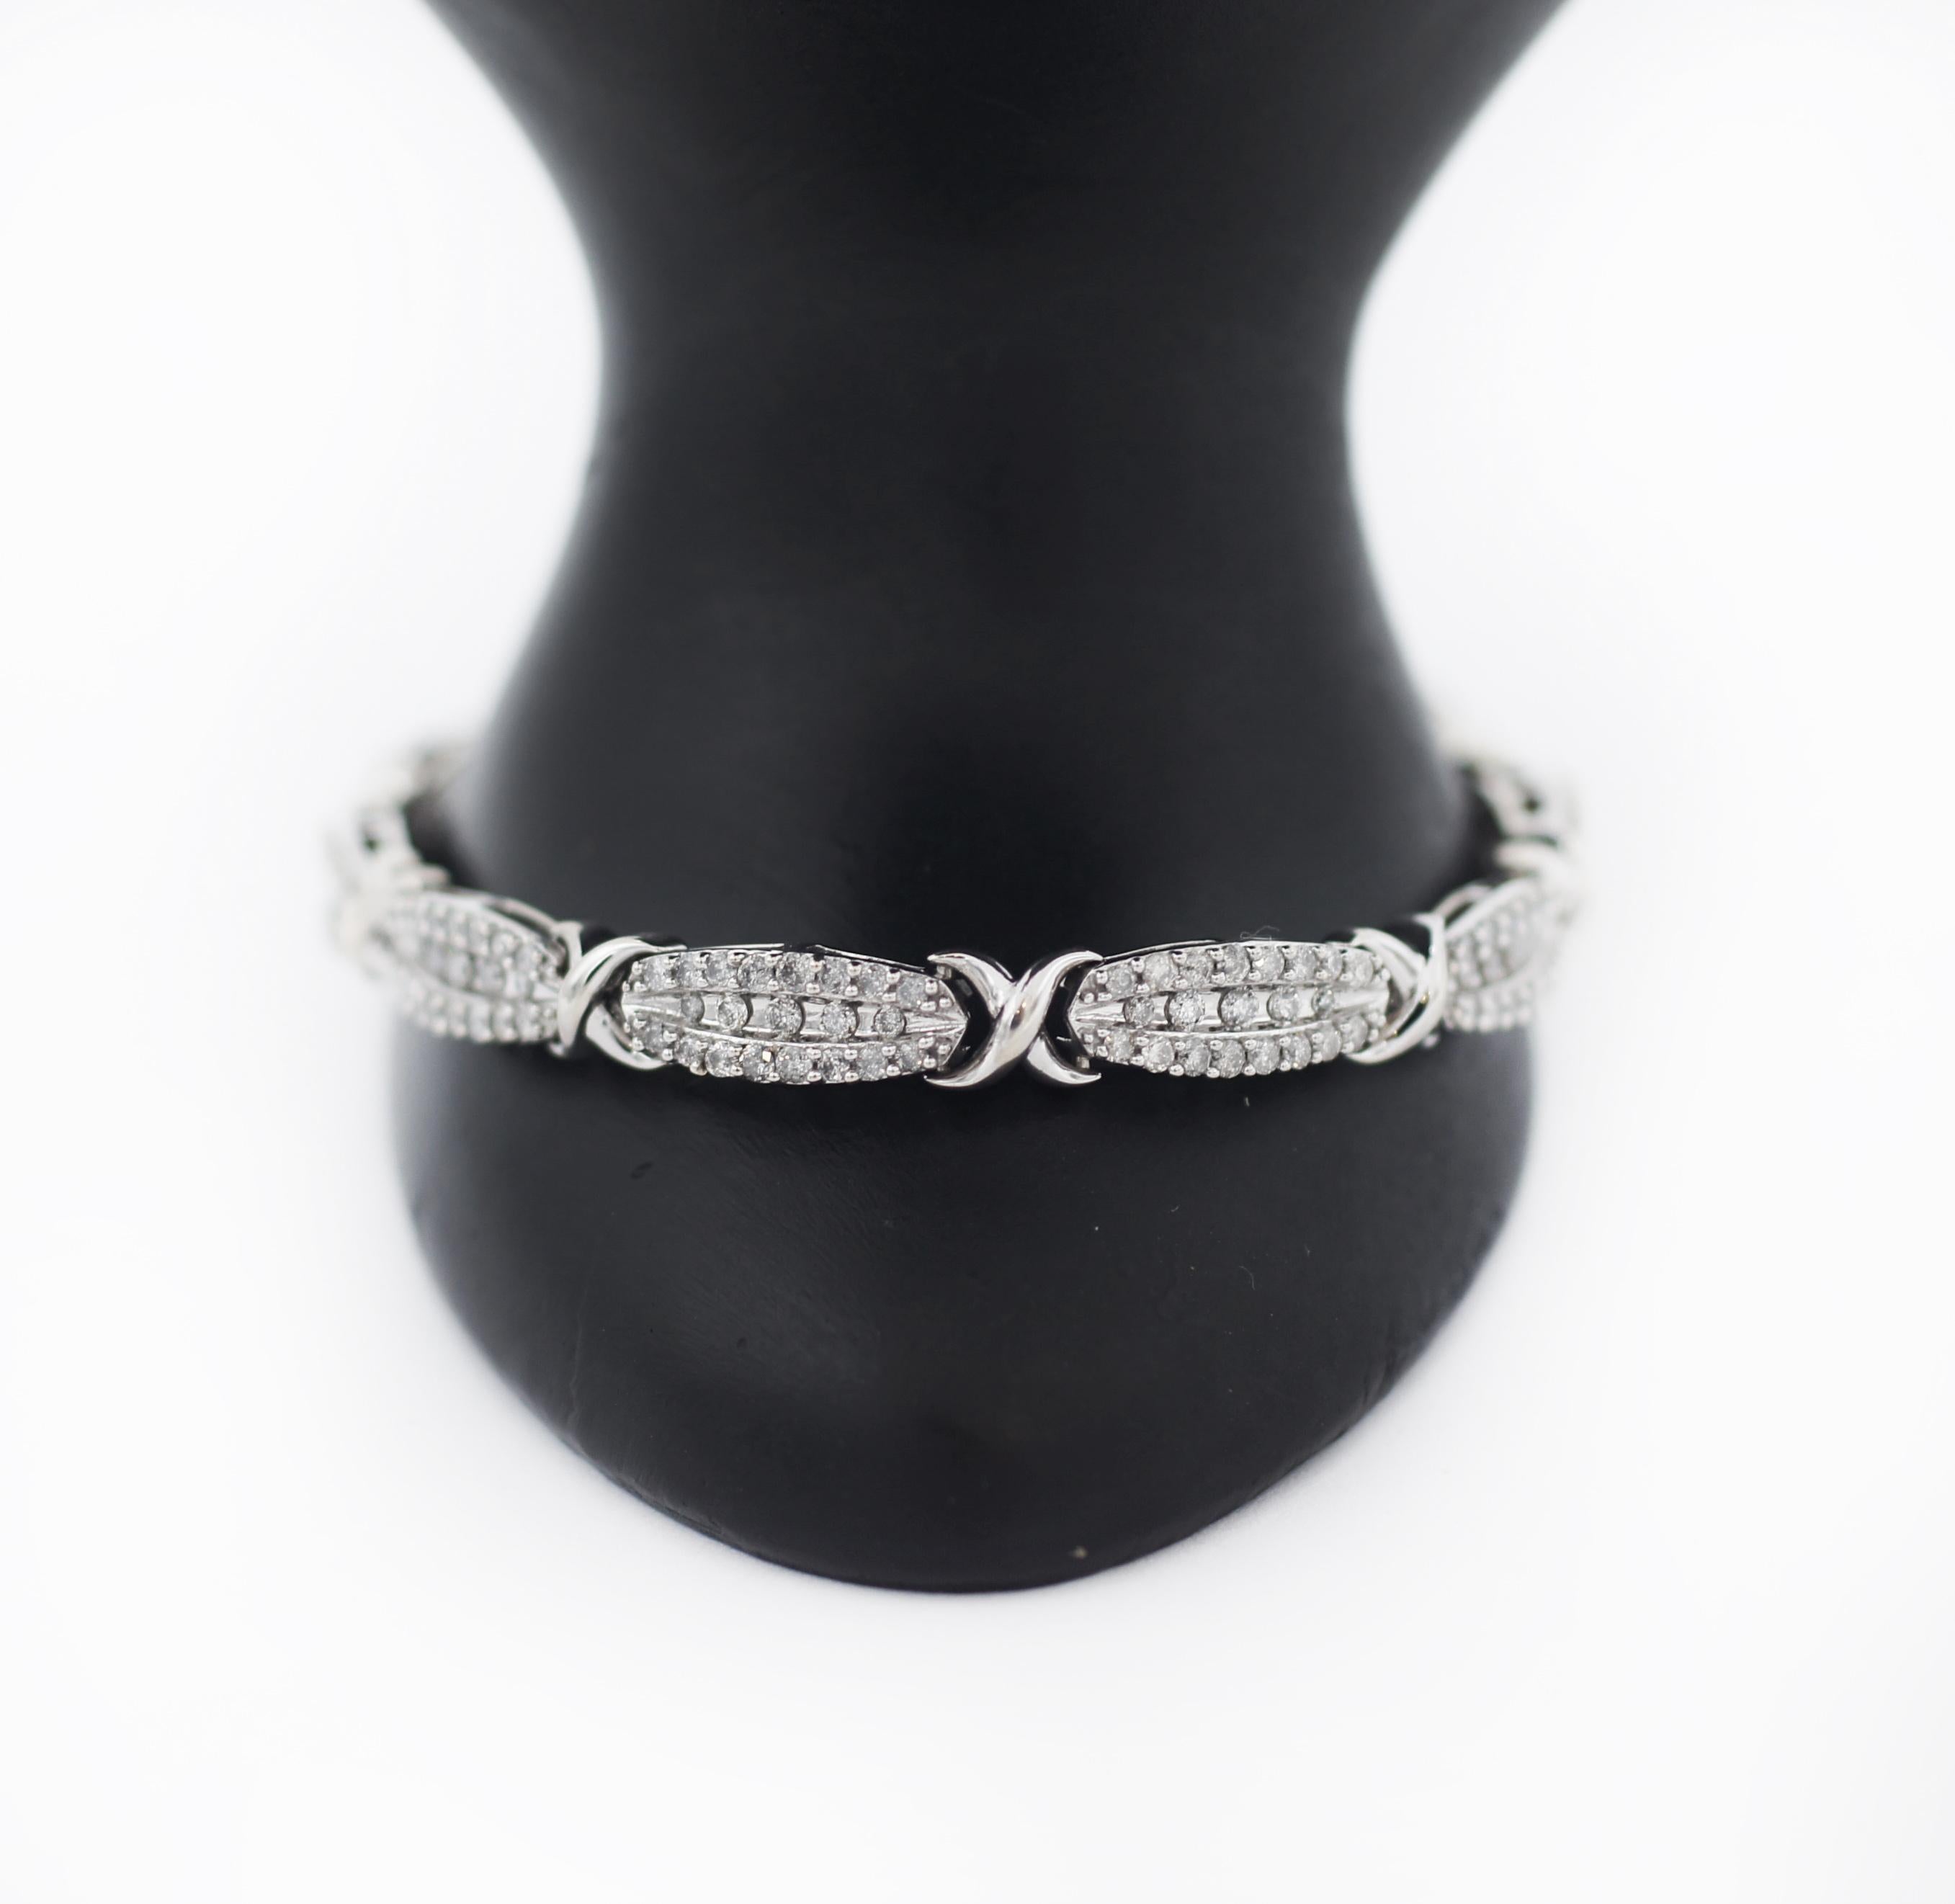 Beautiful Oval shaped links that are paved with diamonds
every oval link is linked by an x shaped connector
Made in 10K White Gold
Total bracelet weight of 14.5 grams
Approx. 2 carats in Diamonds
Bracelet 7.5